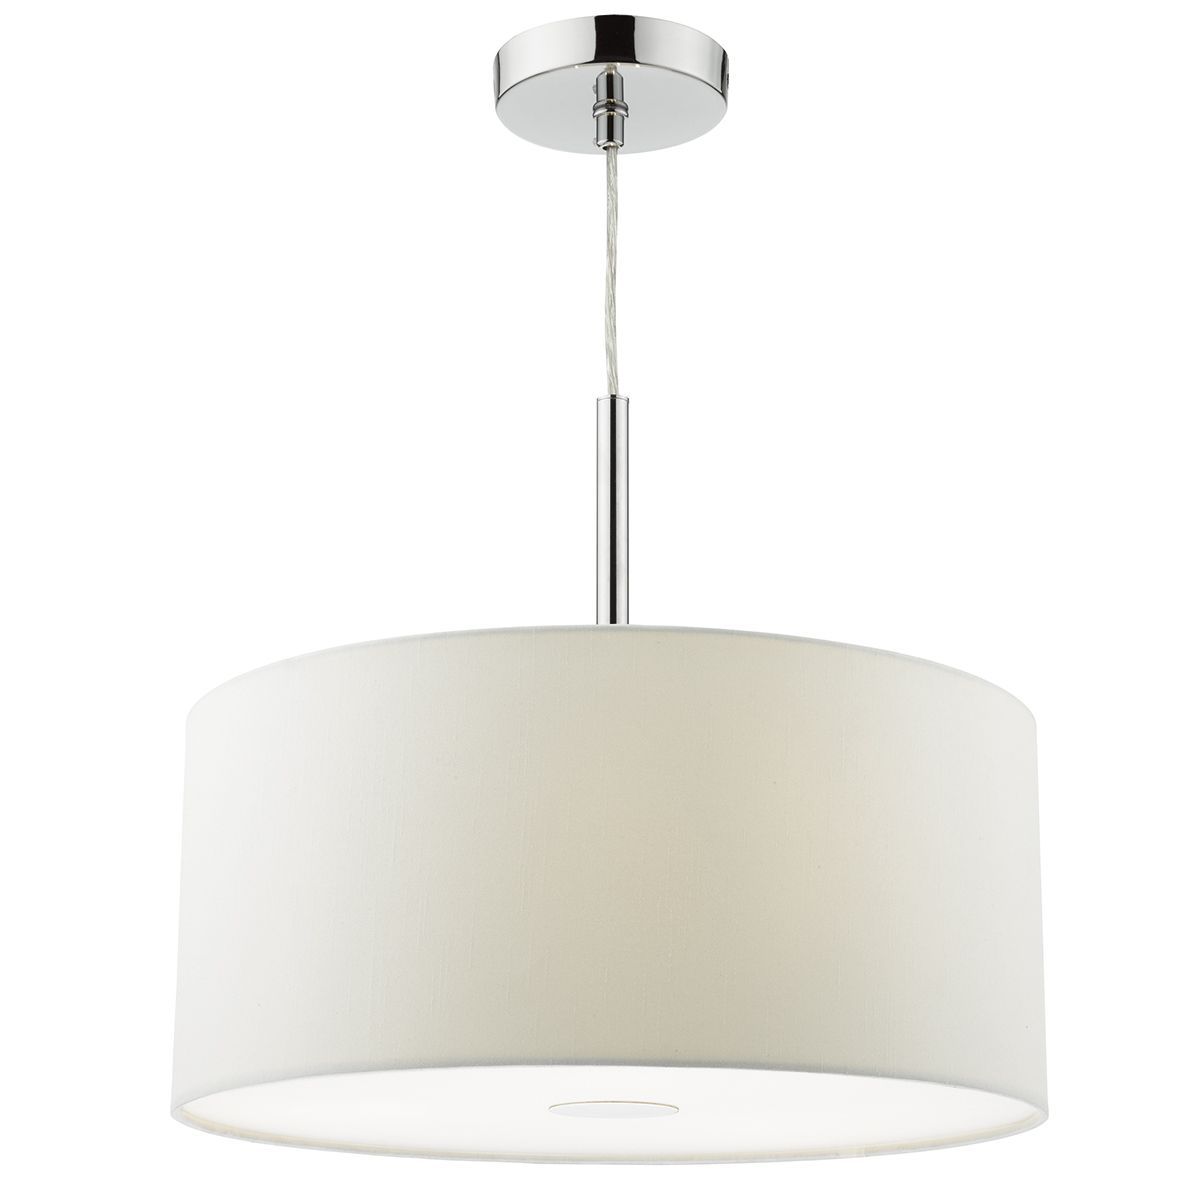 Ronda 3Lt Small Pendant With Shade And Diffuser - Porcelain White Finish